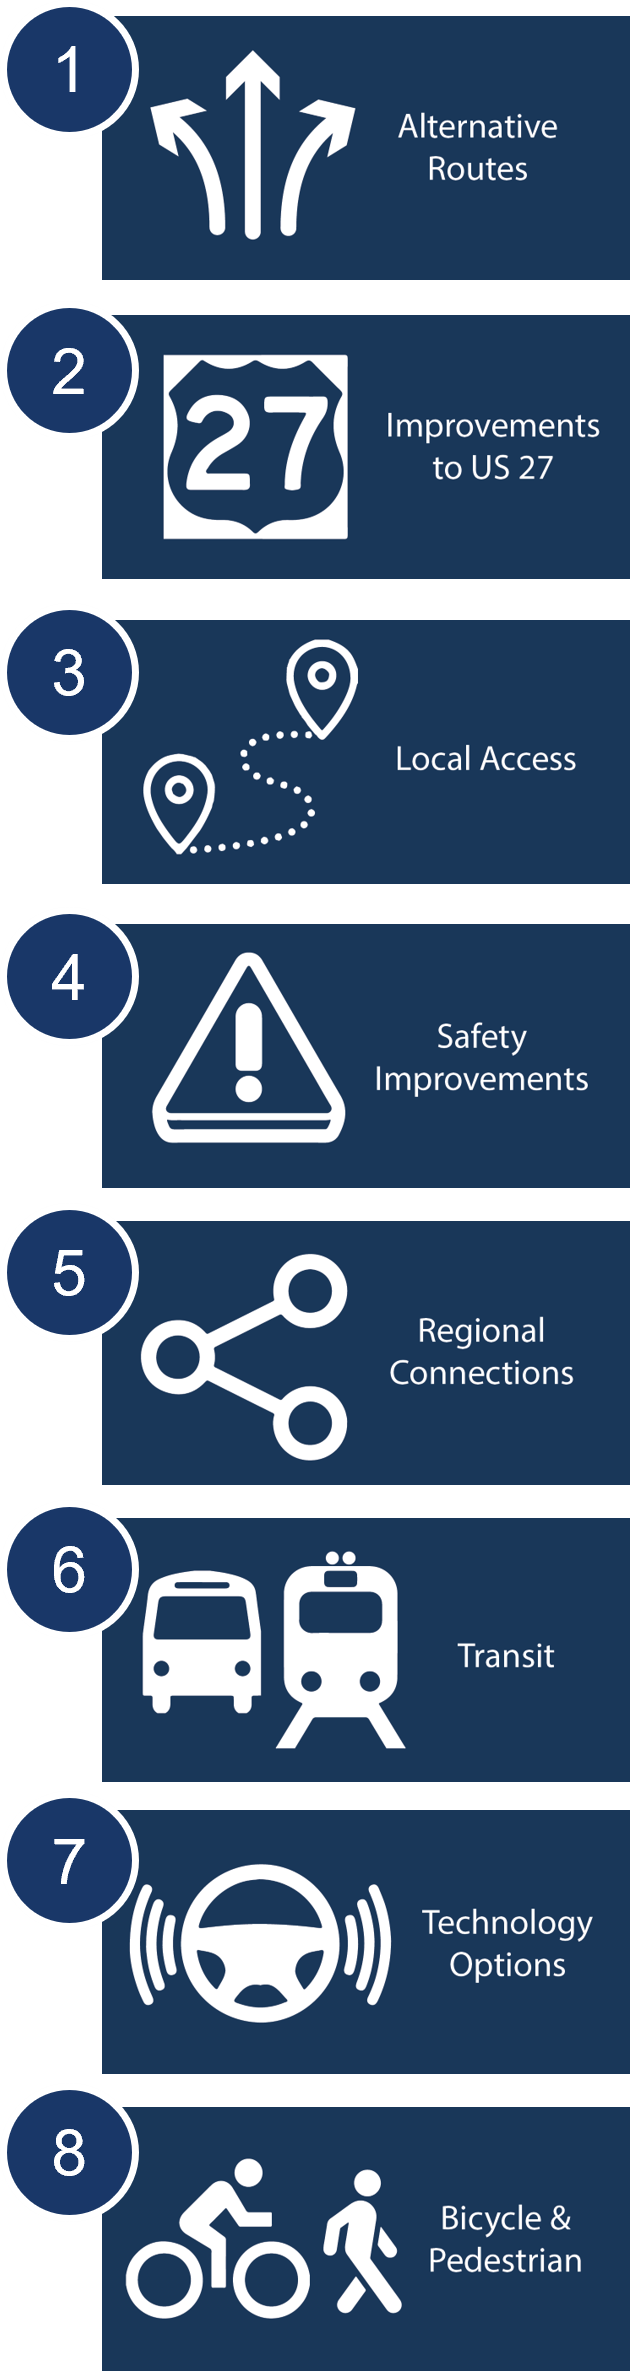 Graphic showing the eight key items to prioritize: alternative routes, improvements to US 27, Local Access, Safety Improvements, Regional Connections, Transit, Technology Options, Bicycle & Pedestrian.